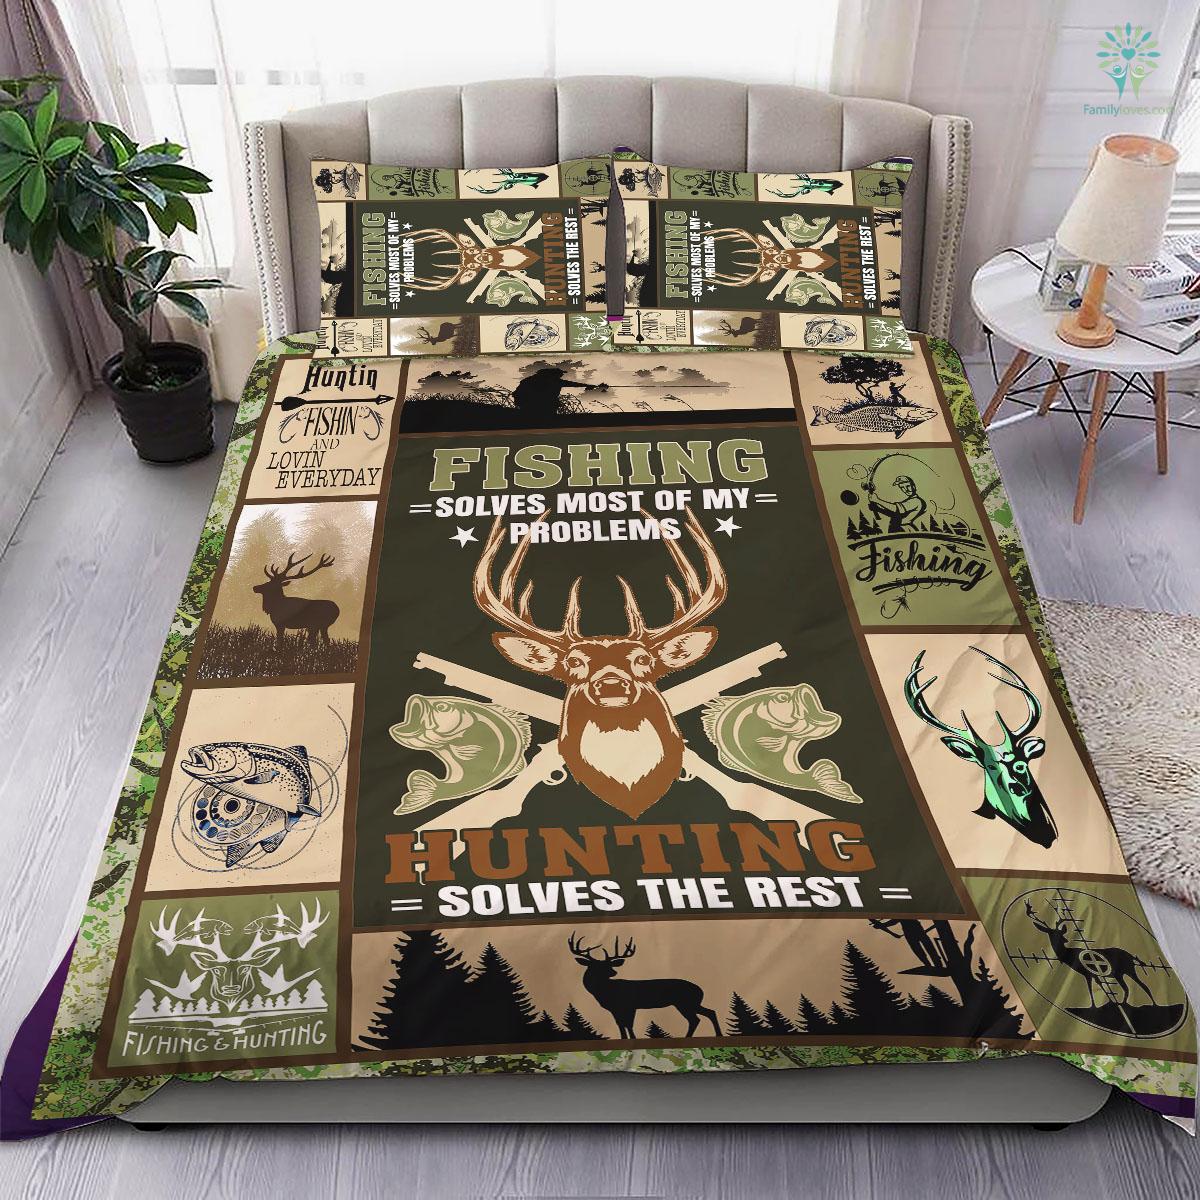 Hunting 3 Bedding Set - Family Loves US Military Veterans Shirts Gifts Ideas